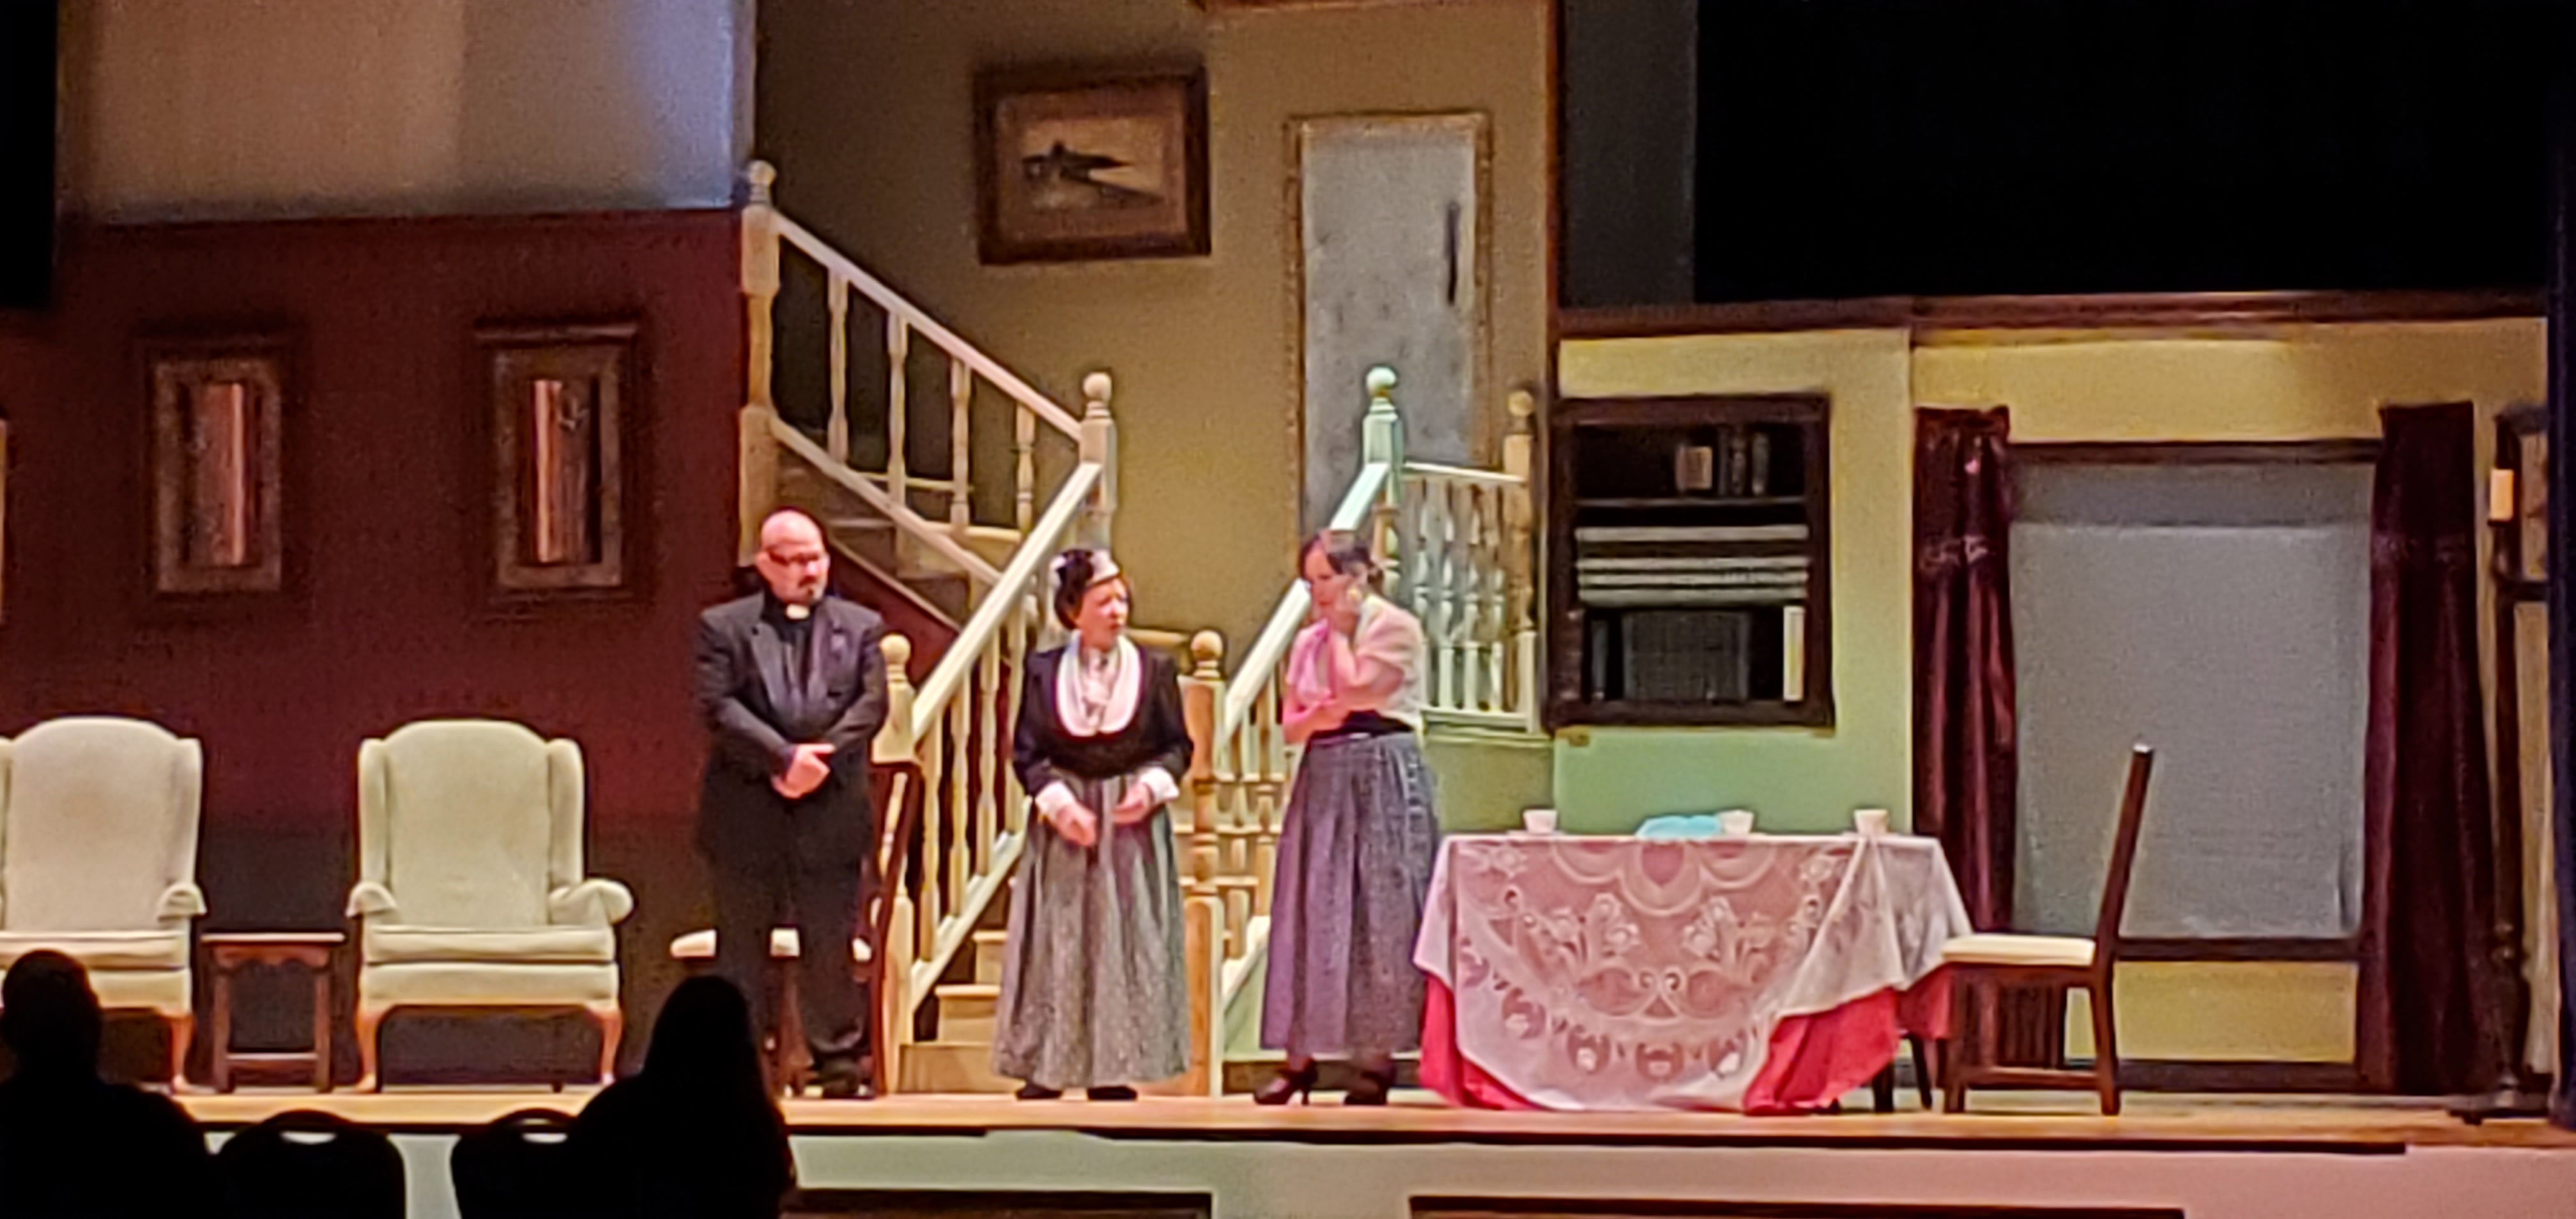 A priest, a woman in Victorian dress and another woman in a white blouse and a long gray dress stand near the steps. A table with a white tablecloth
       and and rose-colored cloth underneath is to the right of the people.